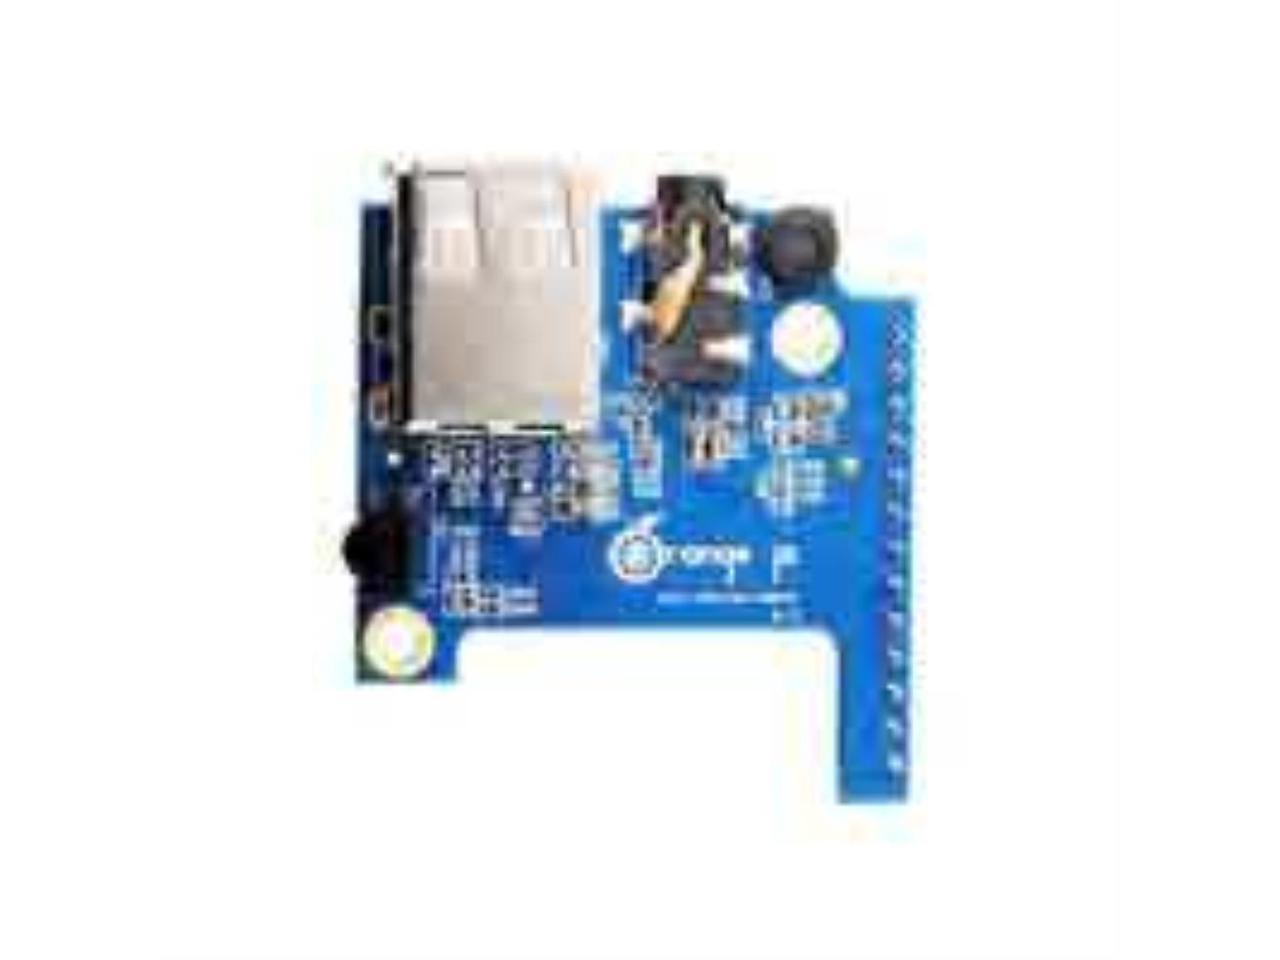 Specialized Expansion USB Board for Orange Pi Zero PC IO Microphone Infra red 